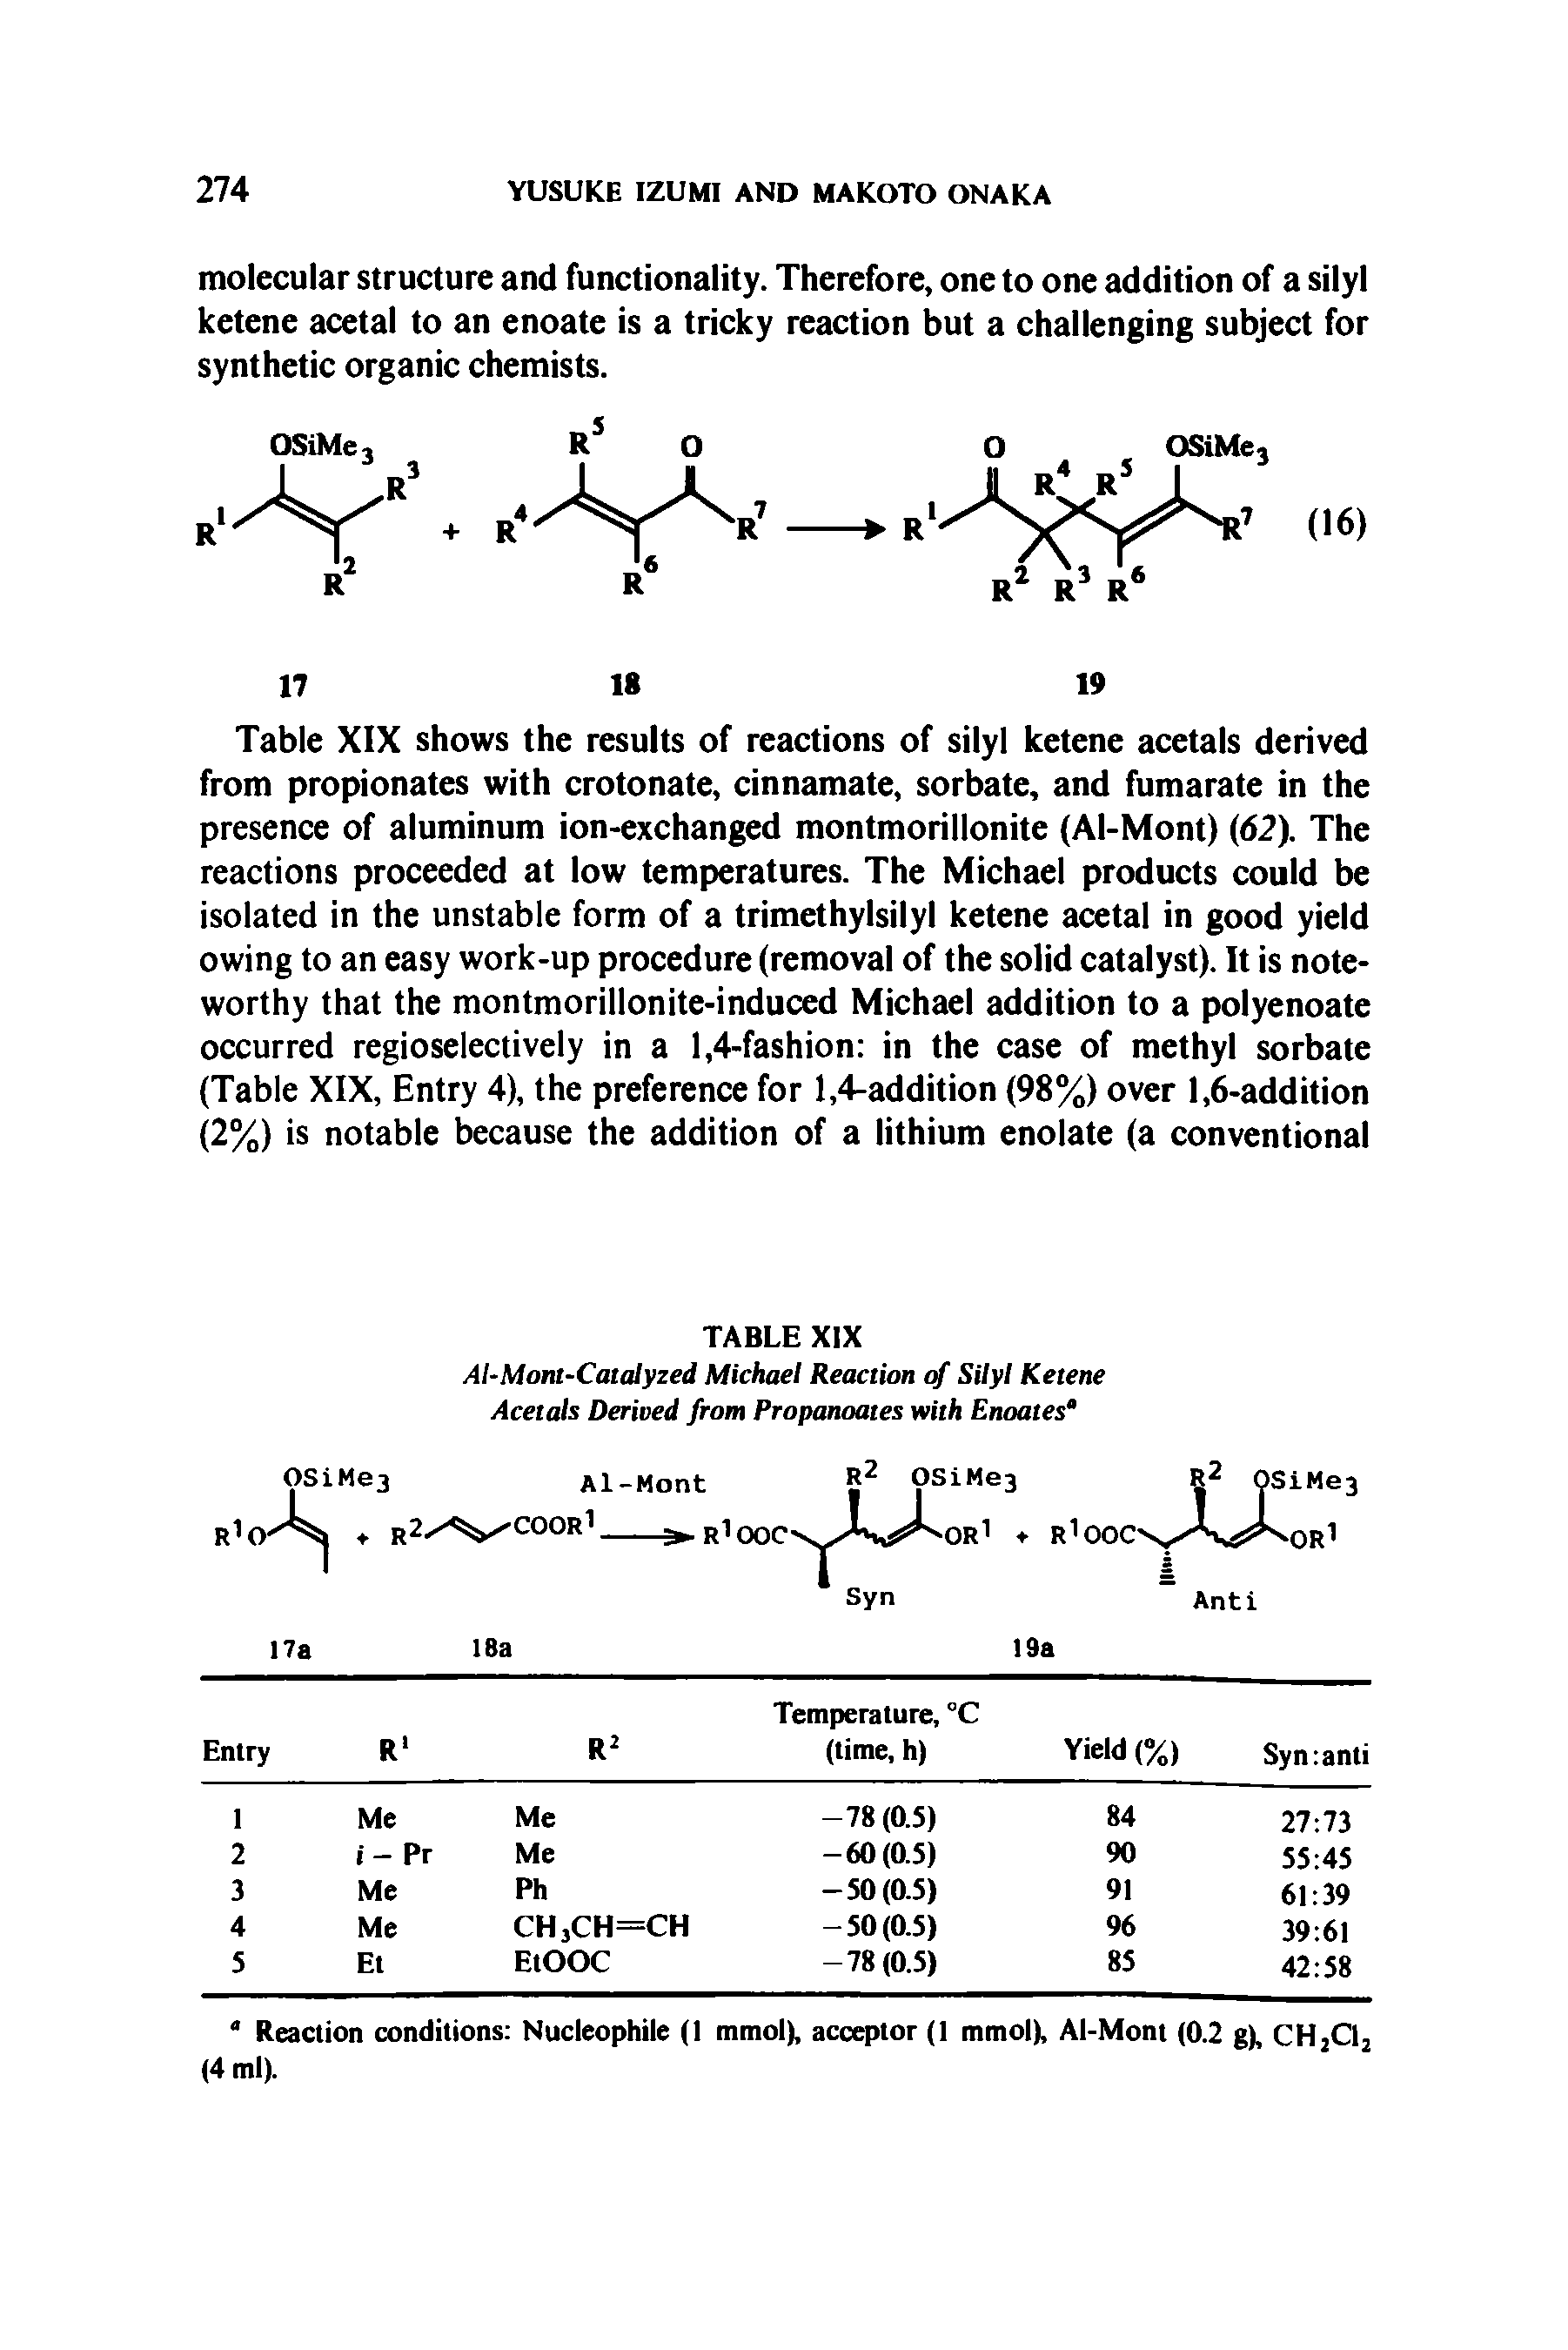 Table XIX shows the results of reactions of silyl ketene acetals derived from propionates with crotonate, cinnamate, sorbate, and fumarate in the presence of aluminum ion-exchanged montmorillonite (Al-Mont) (62). The reactions proceeded at low temperatures. The Michael products could be isolated in the unstable form of a trimethylsilyl ketene acetal in good yield owing to an easy work-up procedure (removal of the solid catalyst). It is noteworthy that the montmorillonite-induced Michael addition to a polyenoate occurred regioselectively in a 1,4-fashion in the case of methyl sorbate (Table XIX, Entry 4), the preference for 1,4-addition (98%) over 1,6-addition (2%) is notable because the addition of a lithium enolate (a conventional...